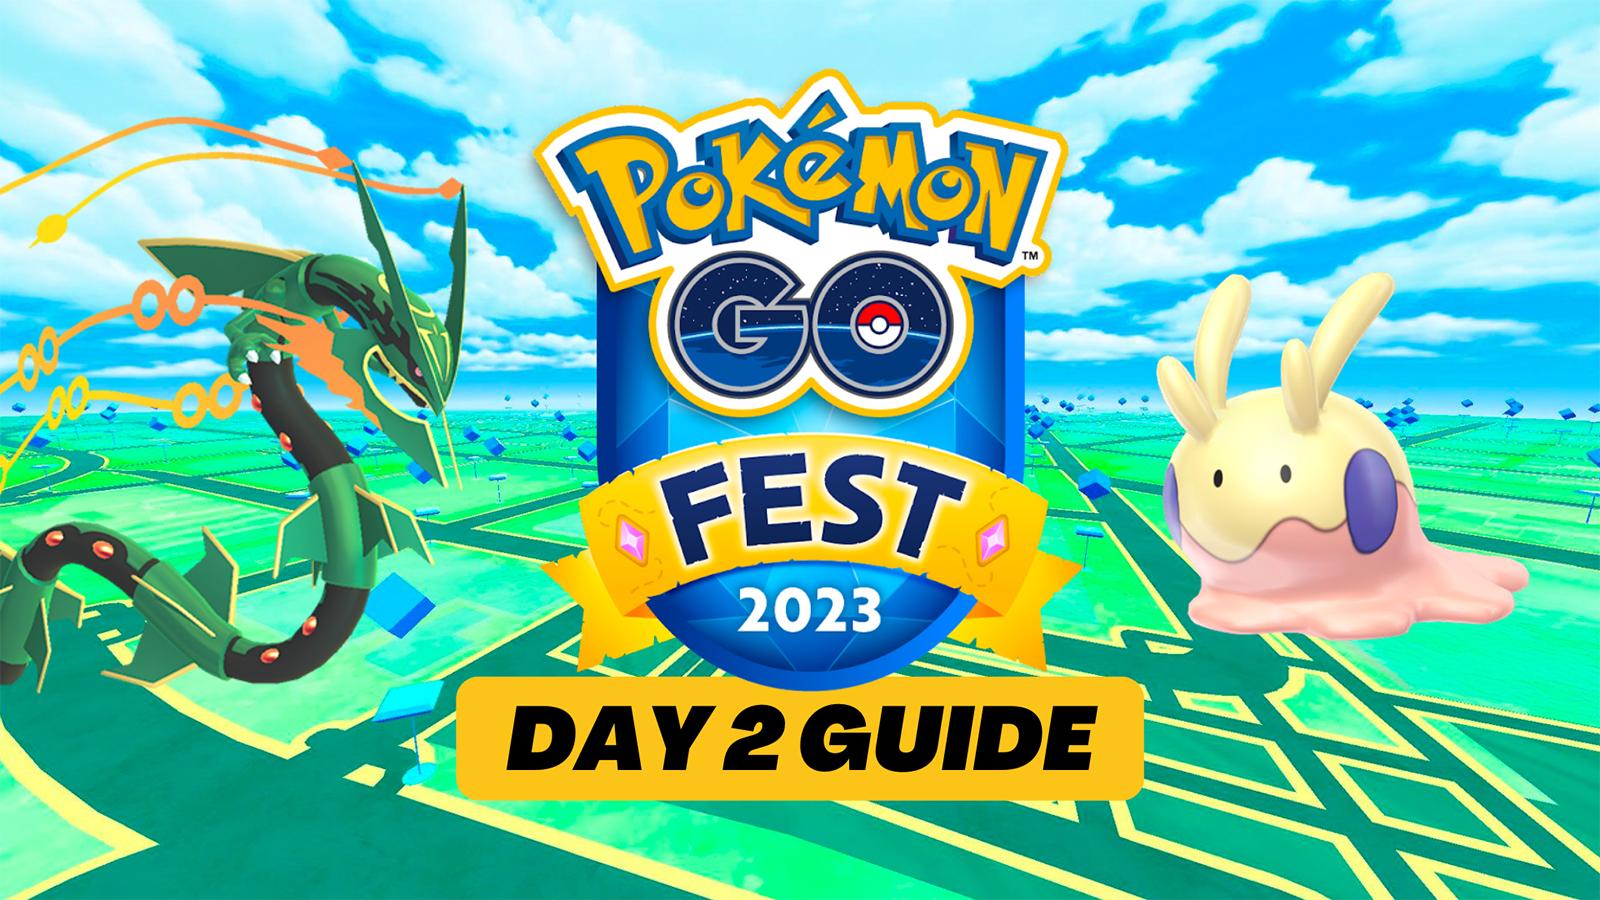 Mega Rayquaza appearing in Pokemon Go Fest 2023 Global Day 2